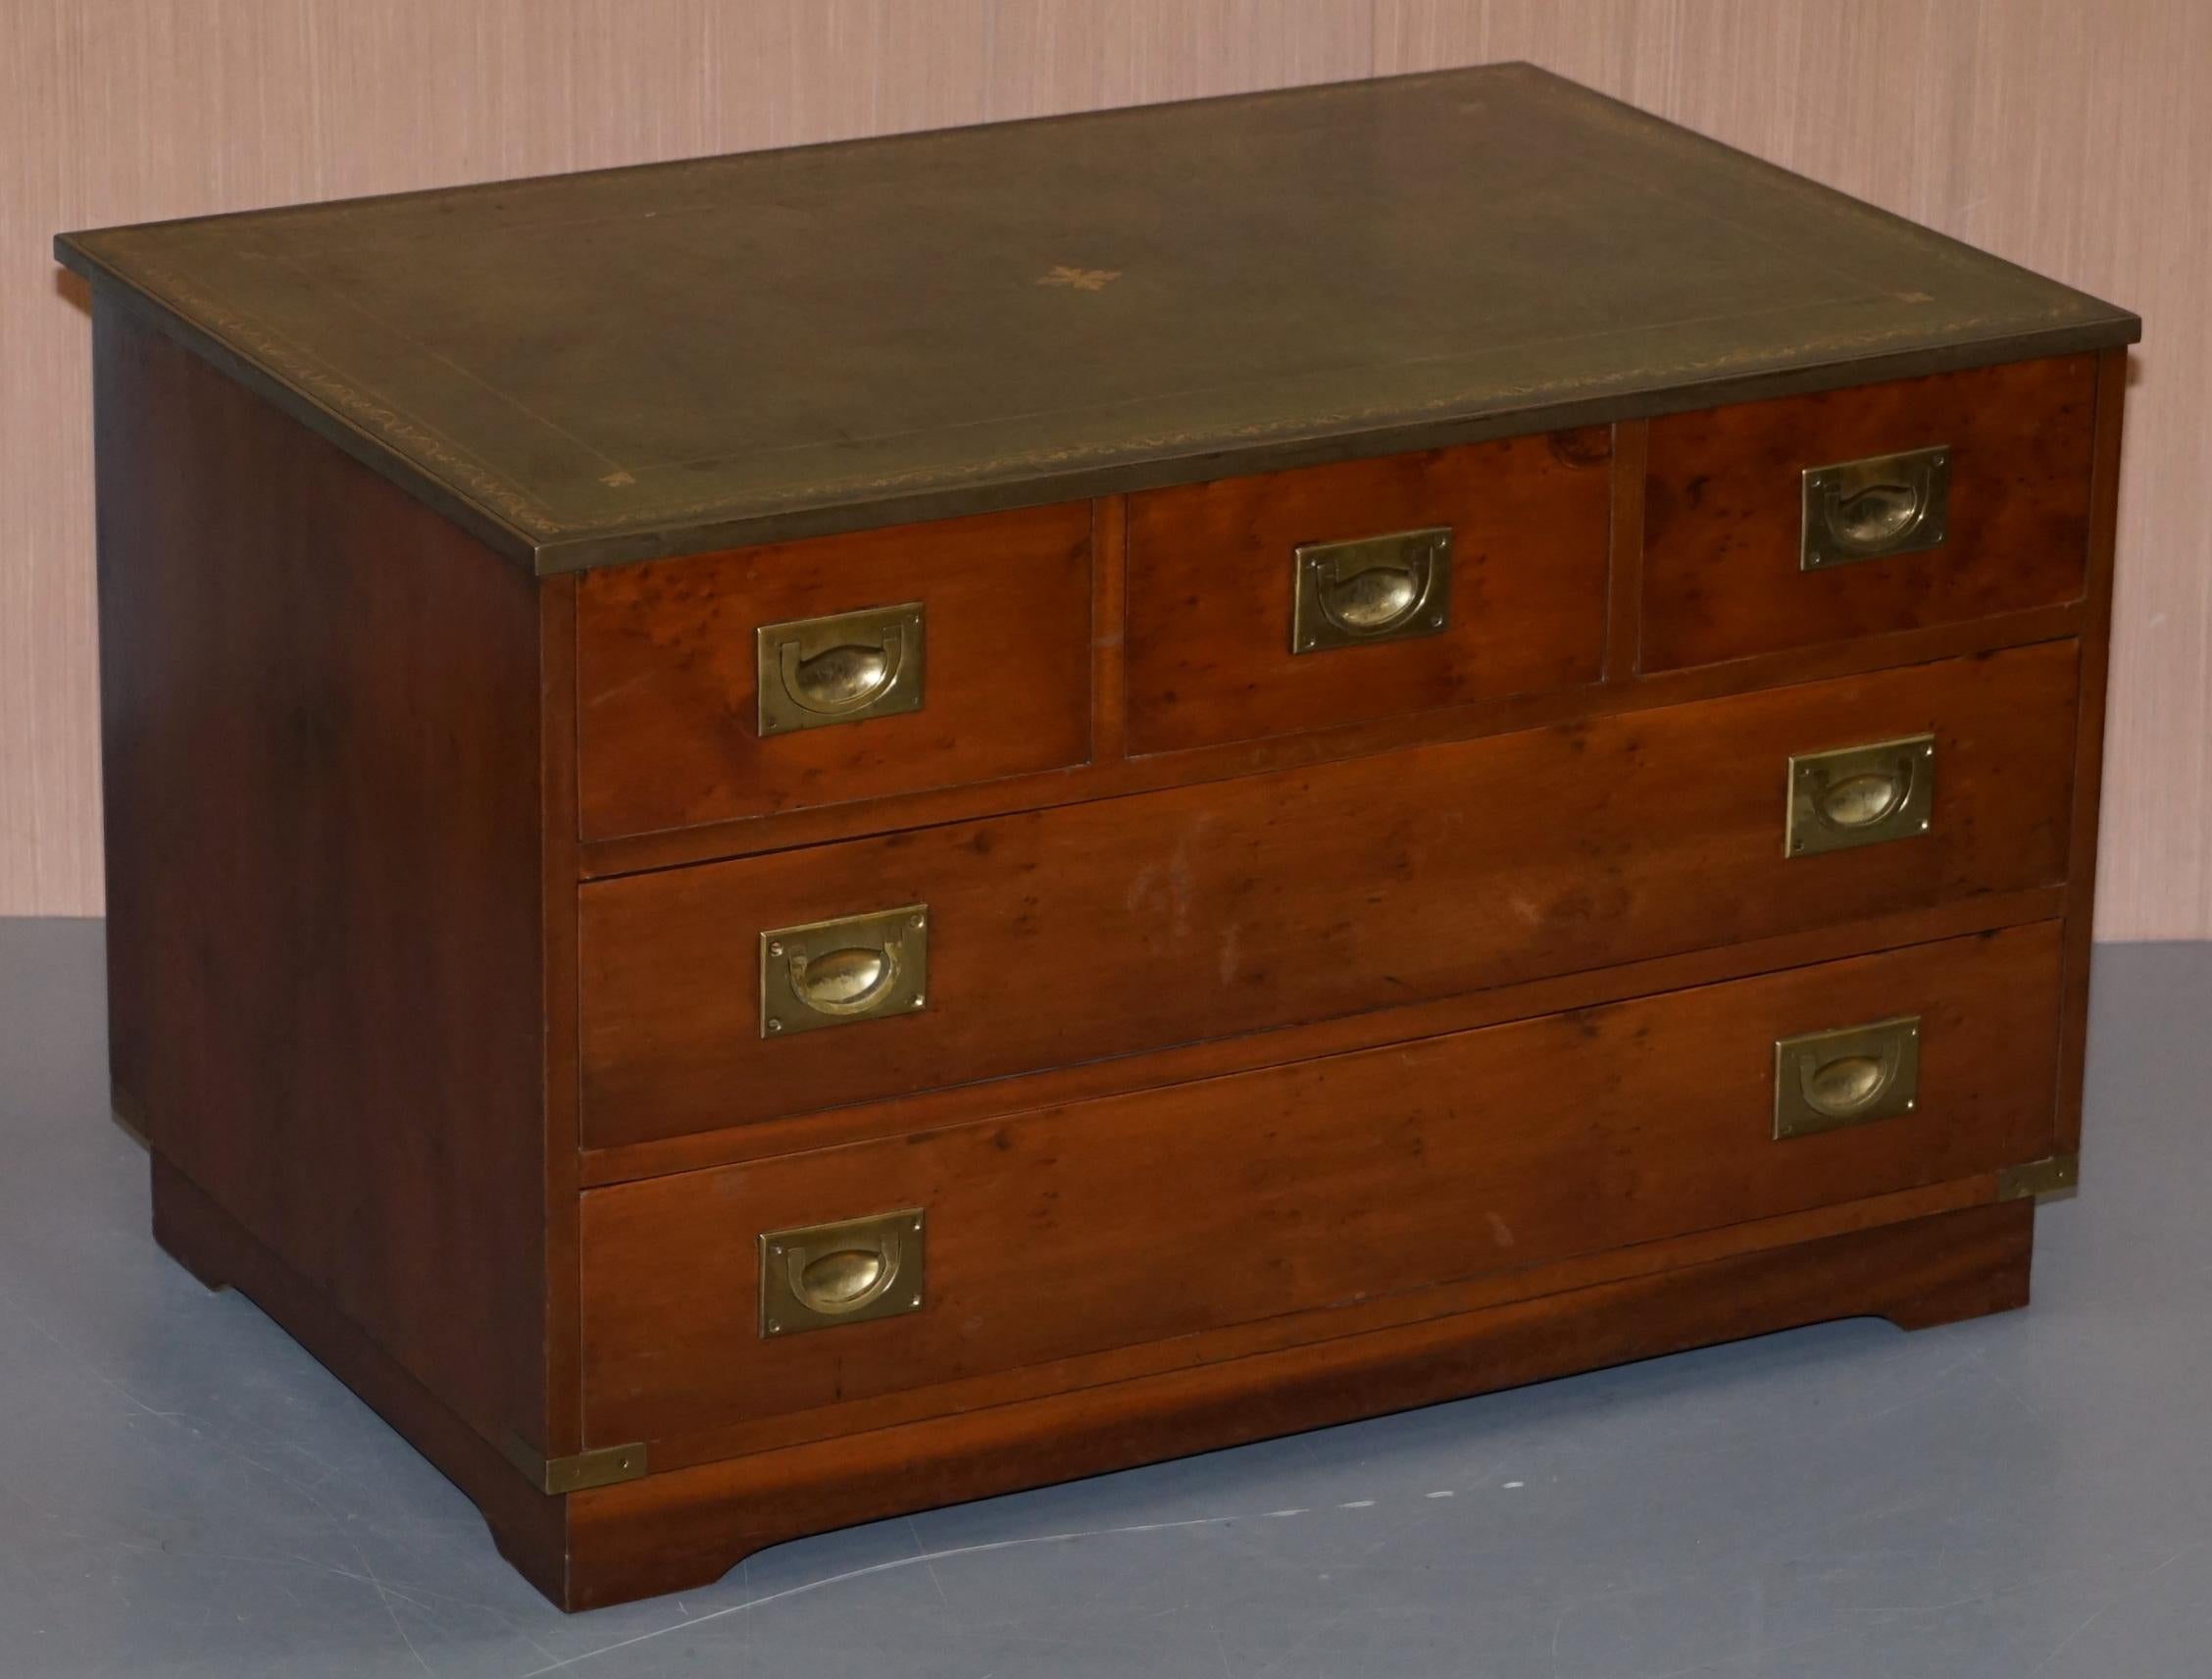 We are delighted to offer for sale this stunning pair of Burr Yew wood Military campaign chests of drawers with green leather tops made by Bevan Funell in the military campaign style

A very good looking and well made set, each chest is in the